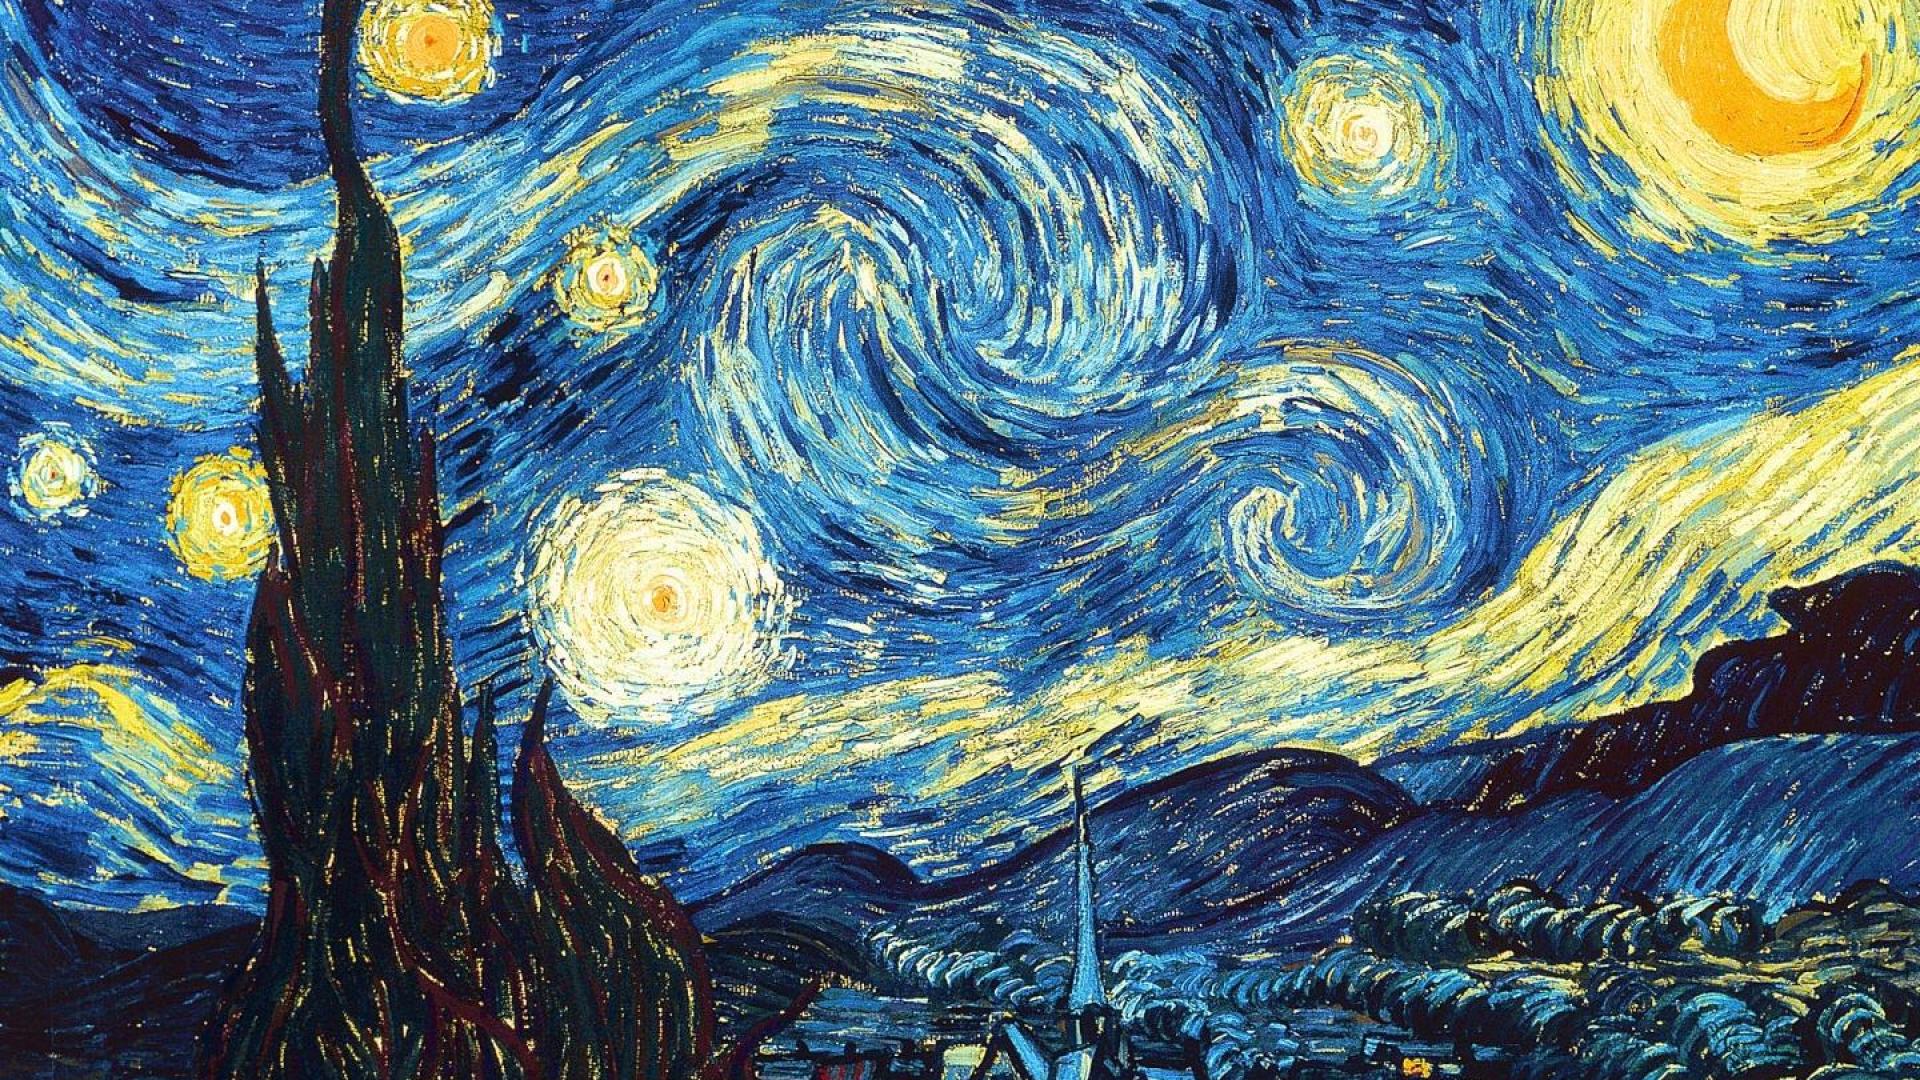 Vincent van gogh starry night - (#53127) - High Quality and ...